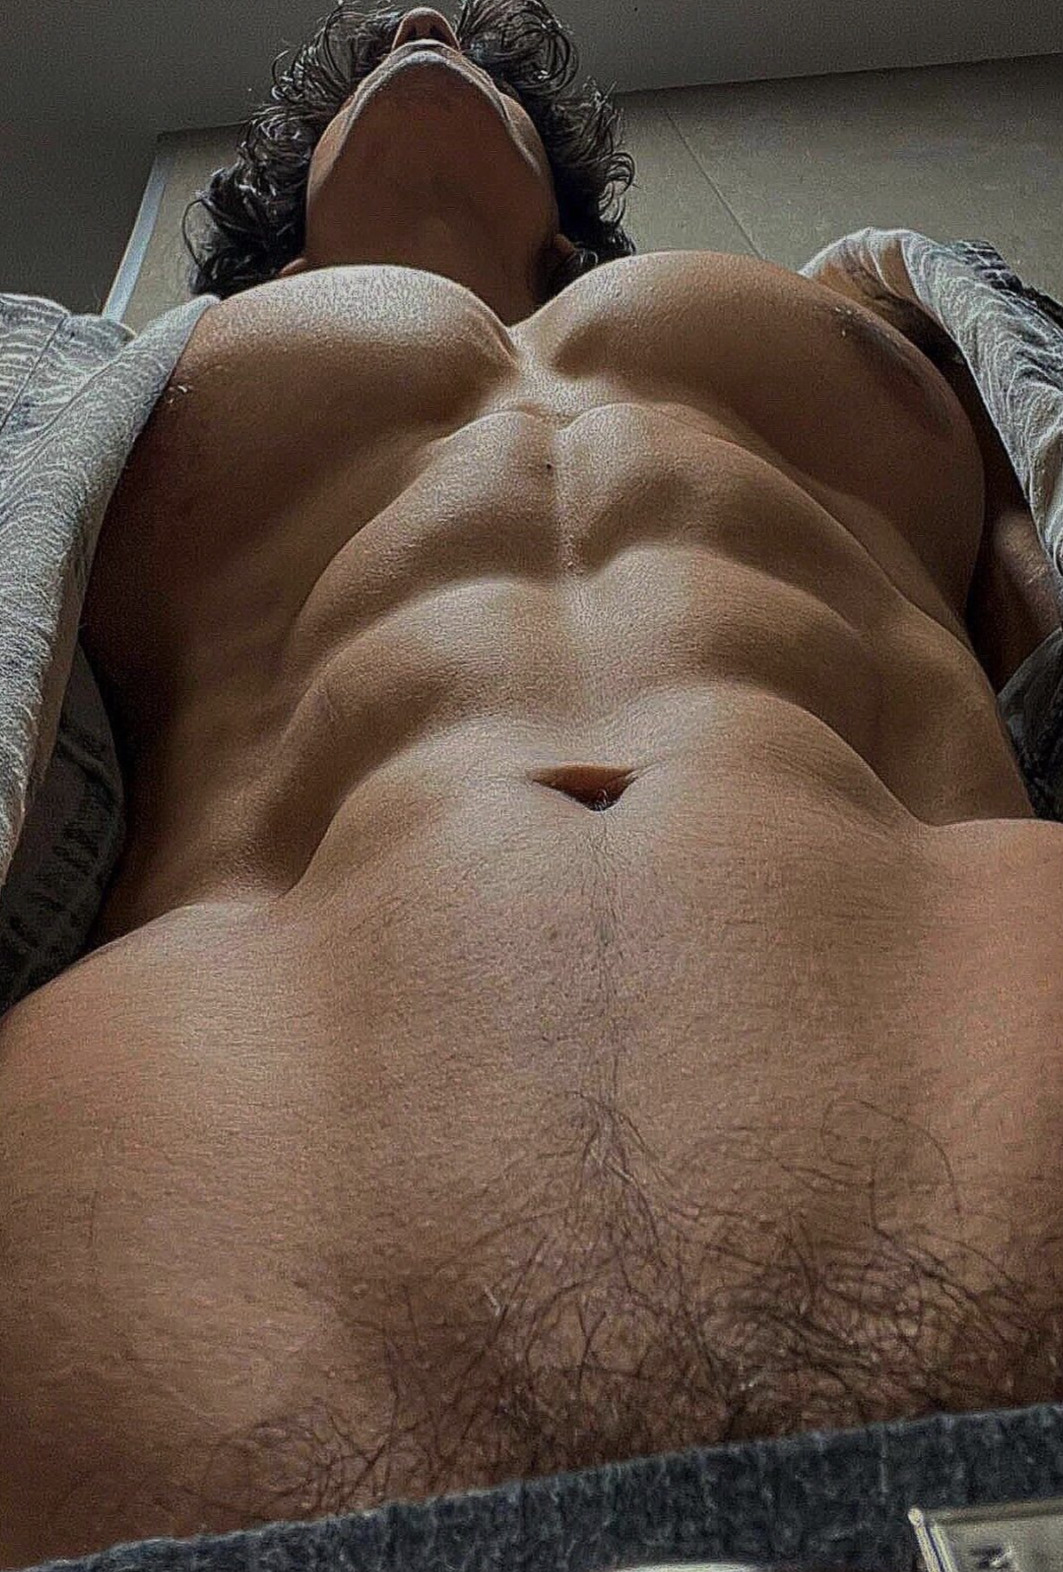 Shirtless Male Muscular Chest Abs Huge Chest POV Shot Man PHOTO 4X6 H206